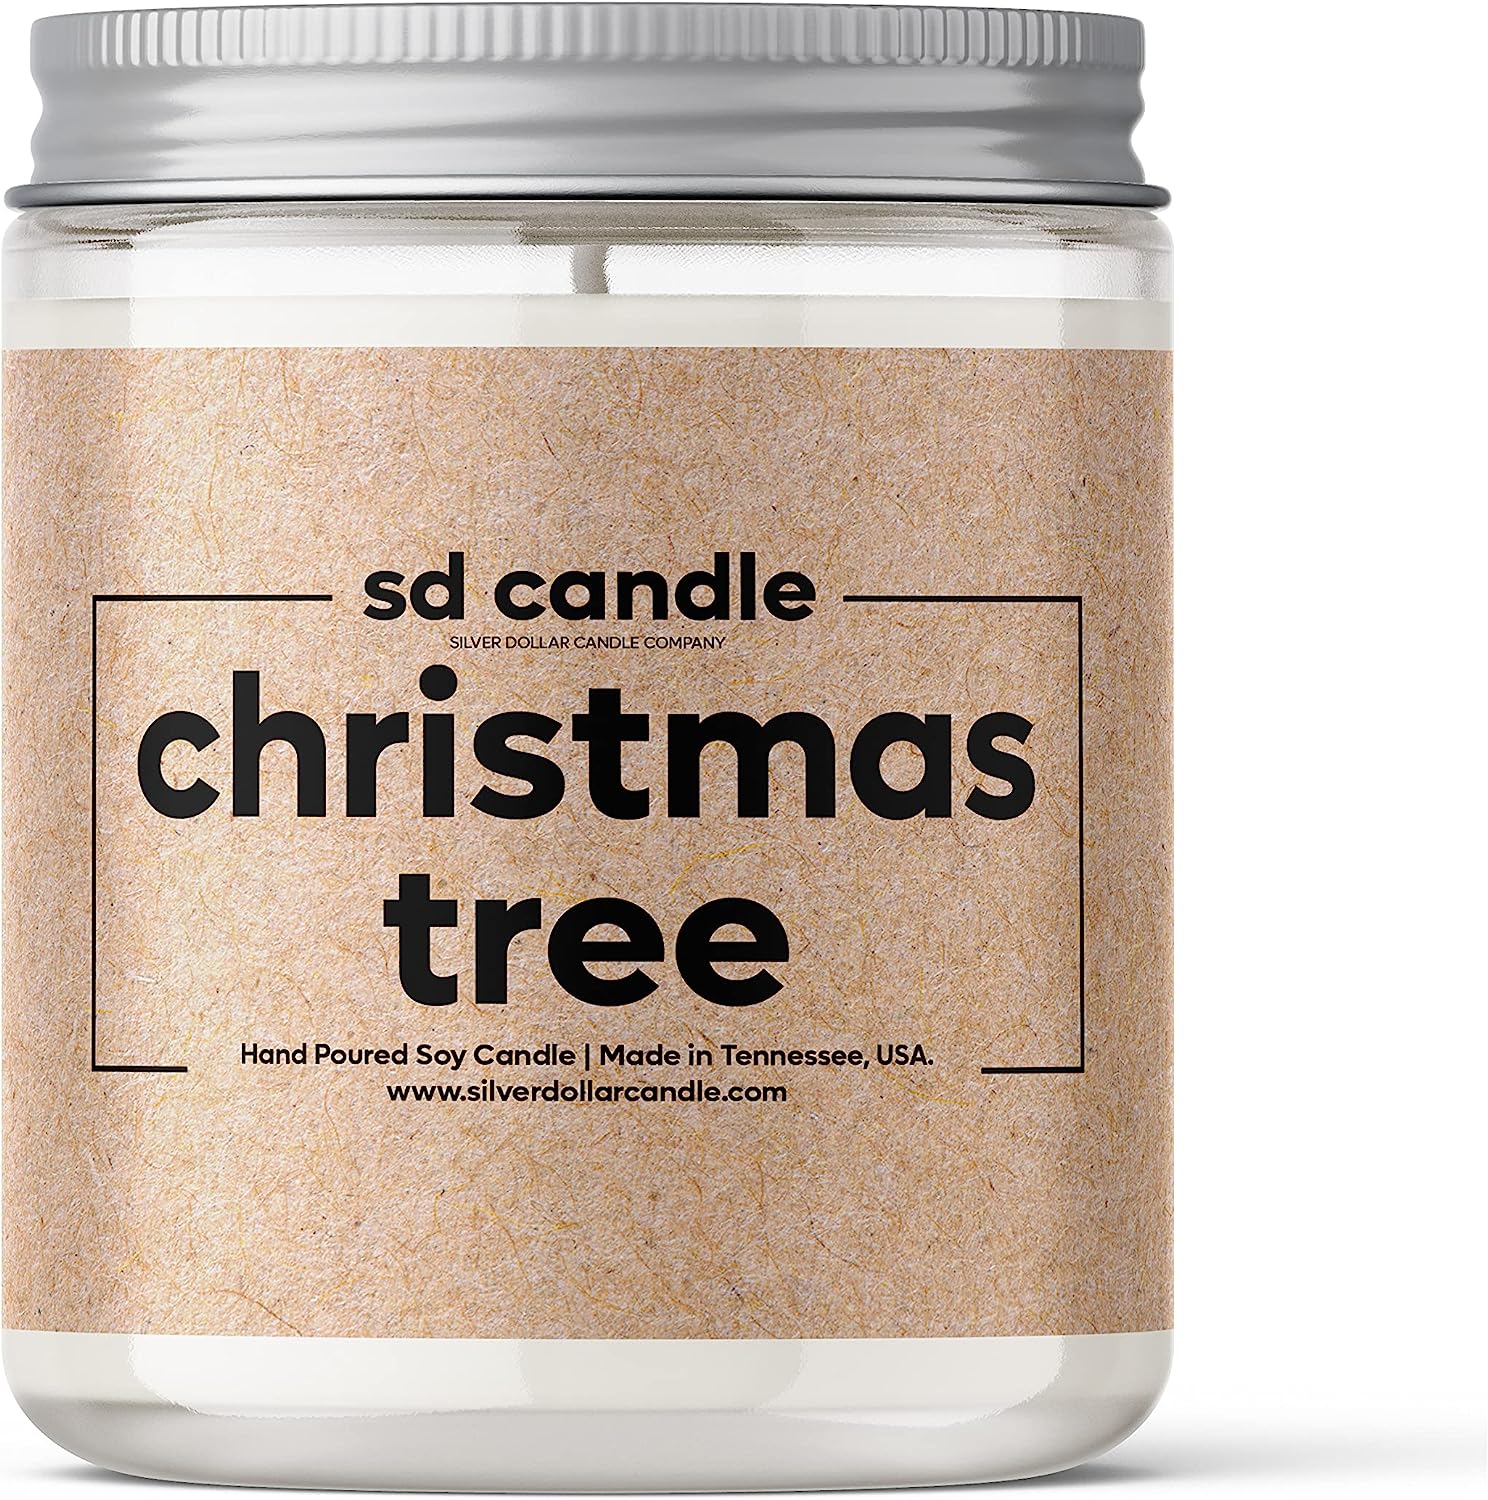 Fresh Cut Christmas Tree Scented Candle 8oz Hand- [...]